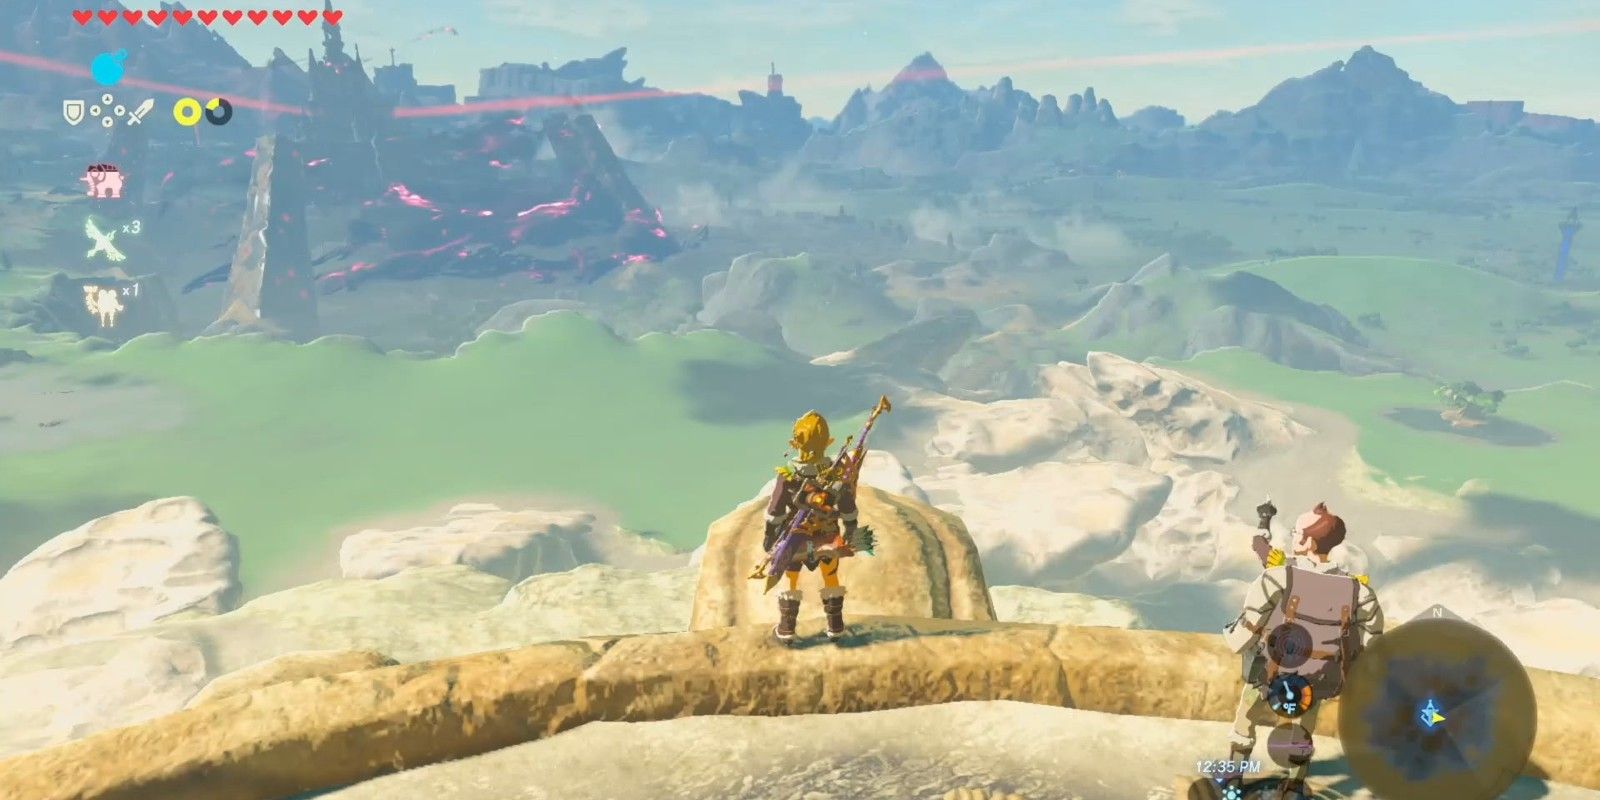 Link surveys the massive landscape from Breath of the Wild 